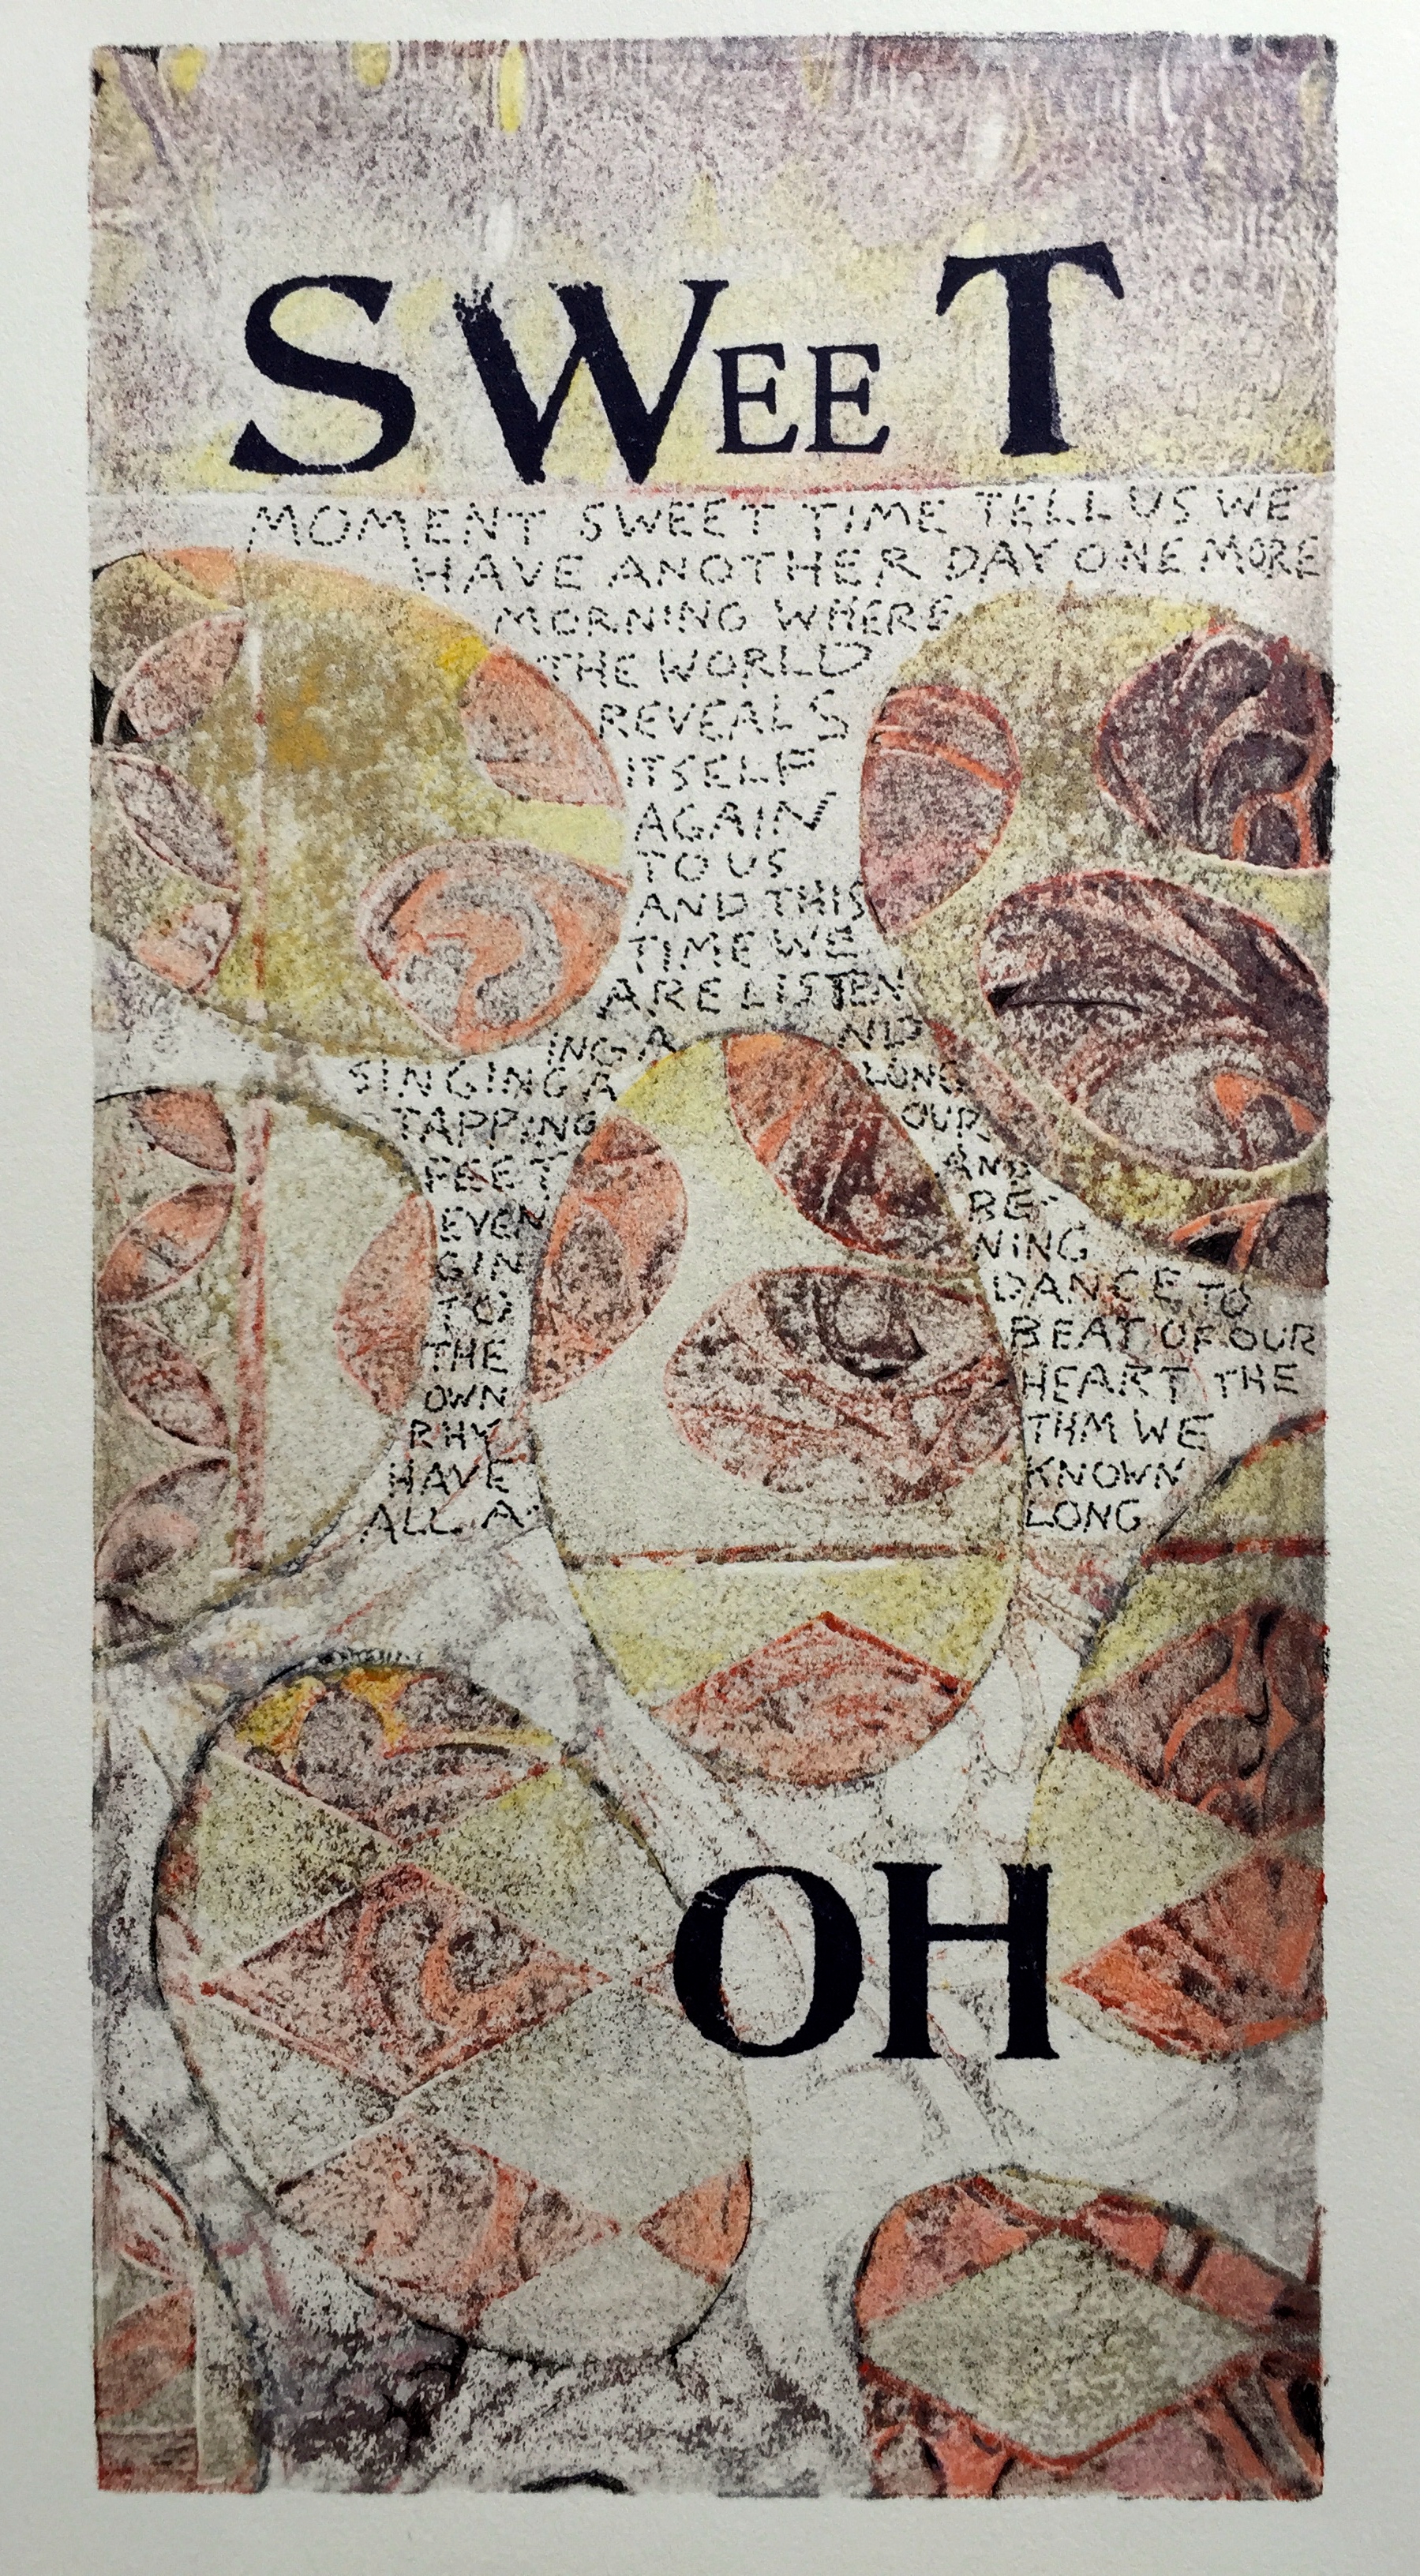   Sweet Oh   6 x 12 inches  mixed media  image: Susan Webster  hand written and stamped&nbsp;text: Stuart Kestenbaum  2015 